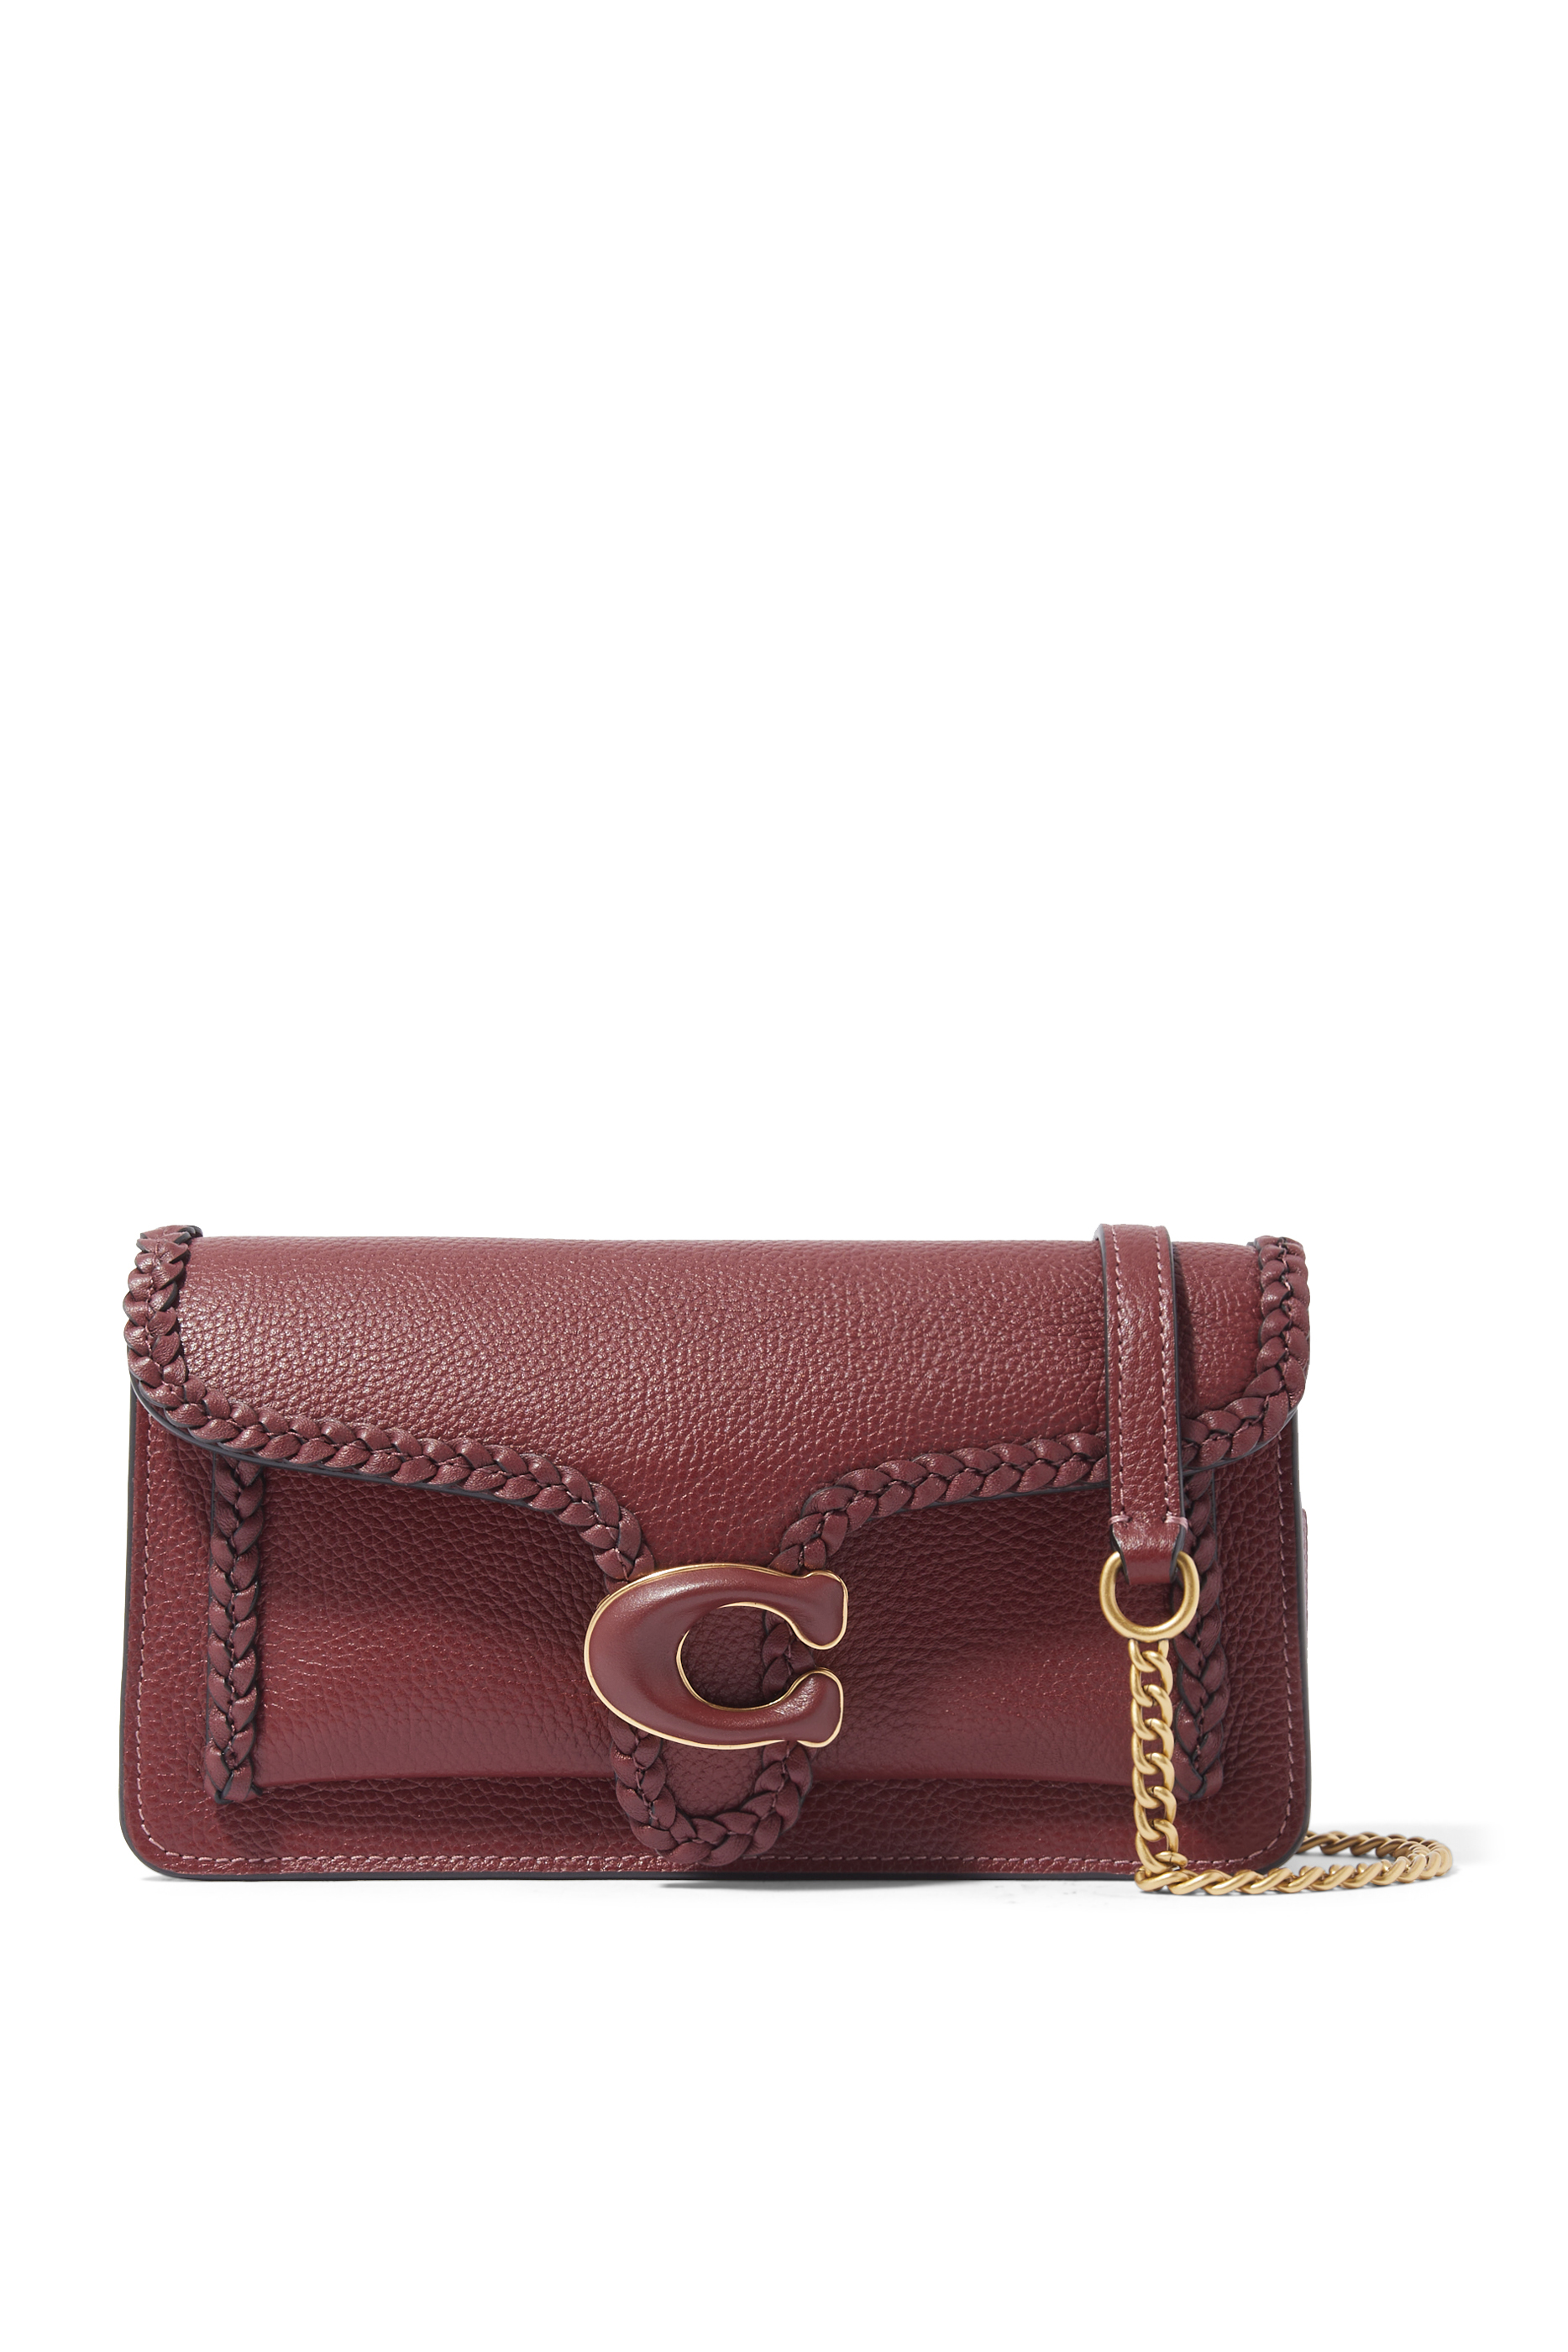 Buy Coach Tabby Chain Clutch With Braid for Womens | Bloomingdale's UAE